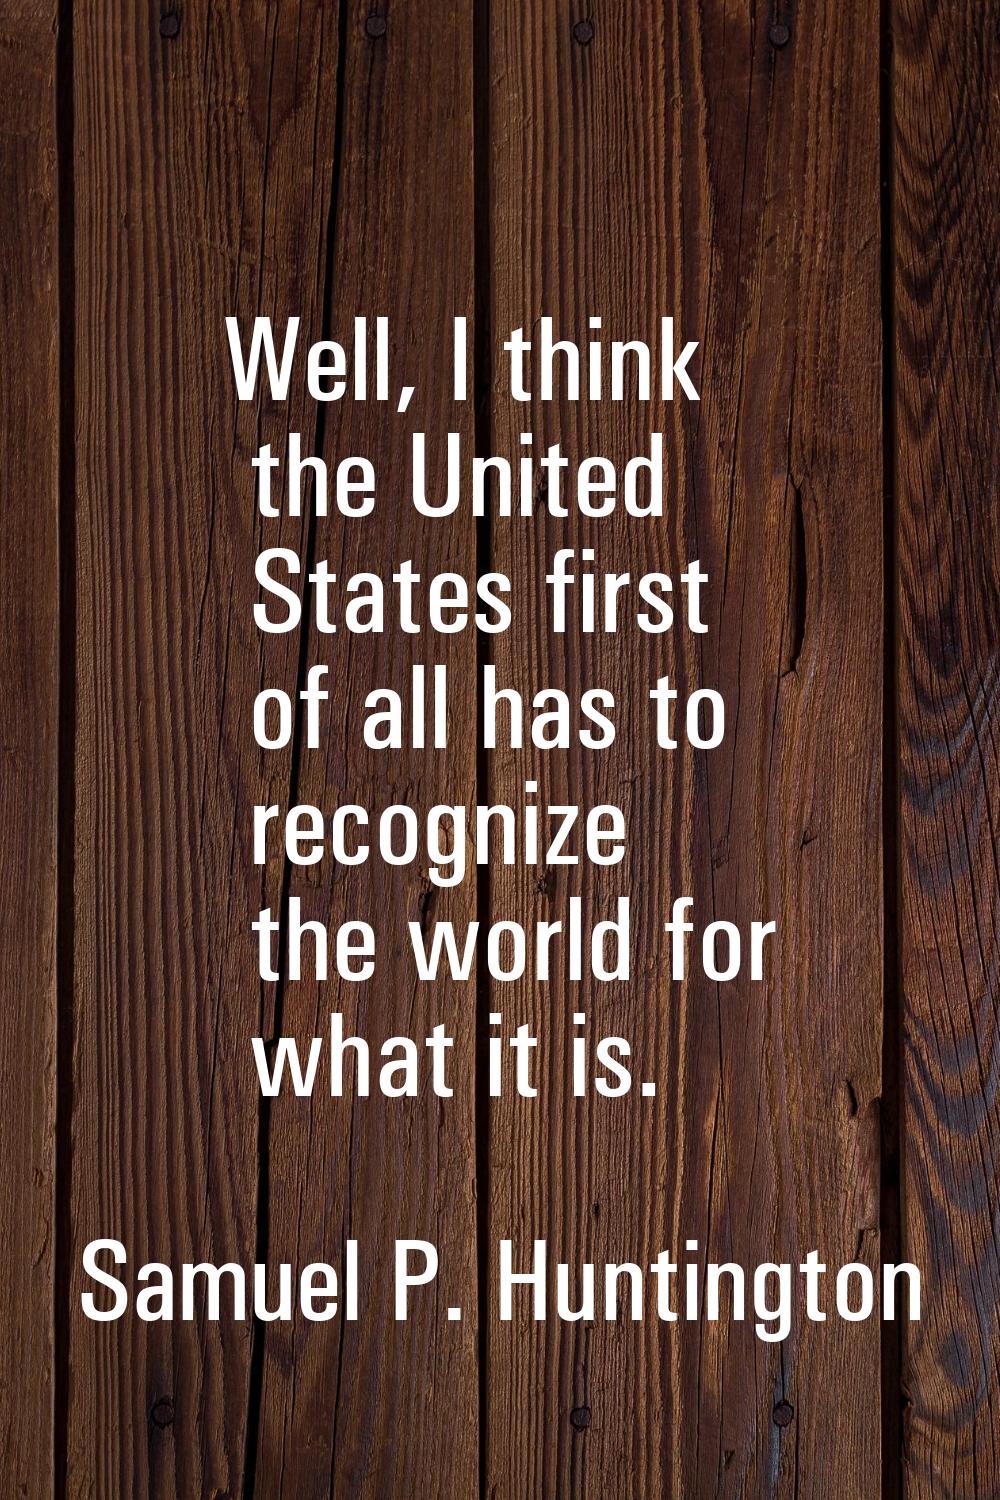 Well, I think the United States first of all has to recognize the world for what it is.